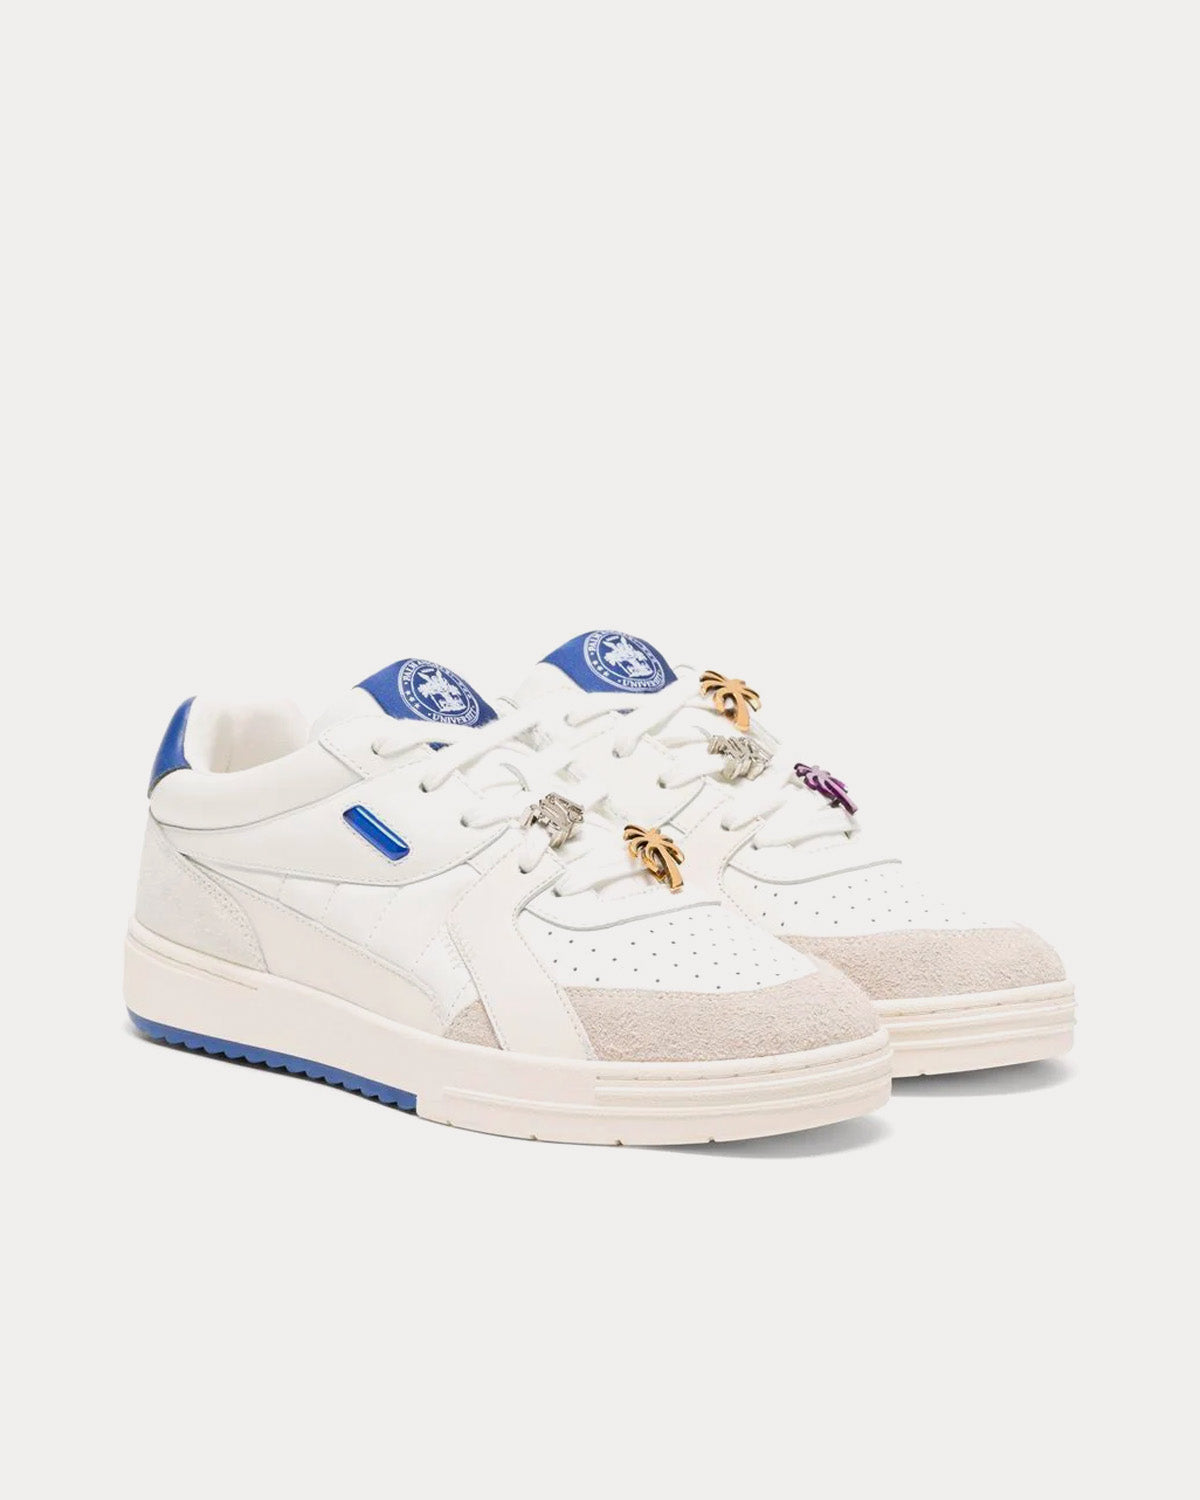 Palm Angels - University 'BEAT' White / Blue Low Top Sneakers